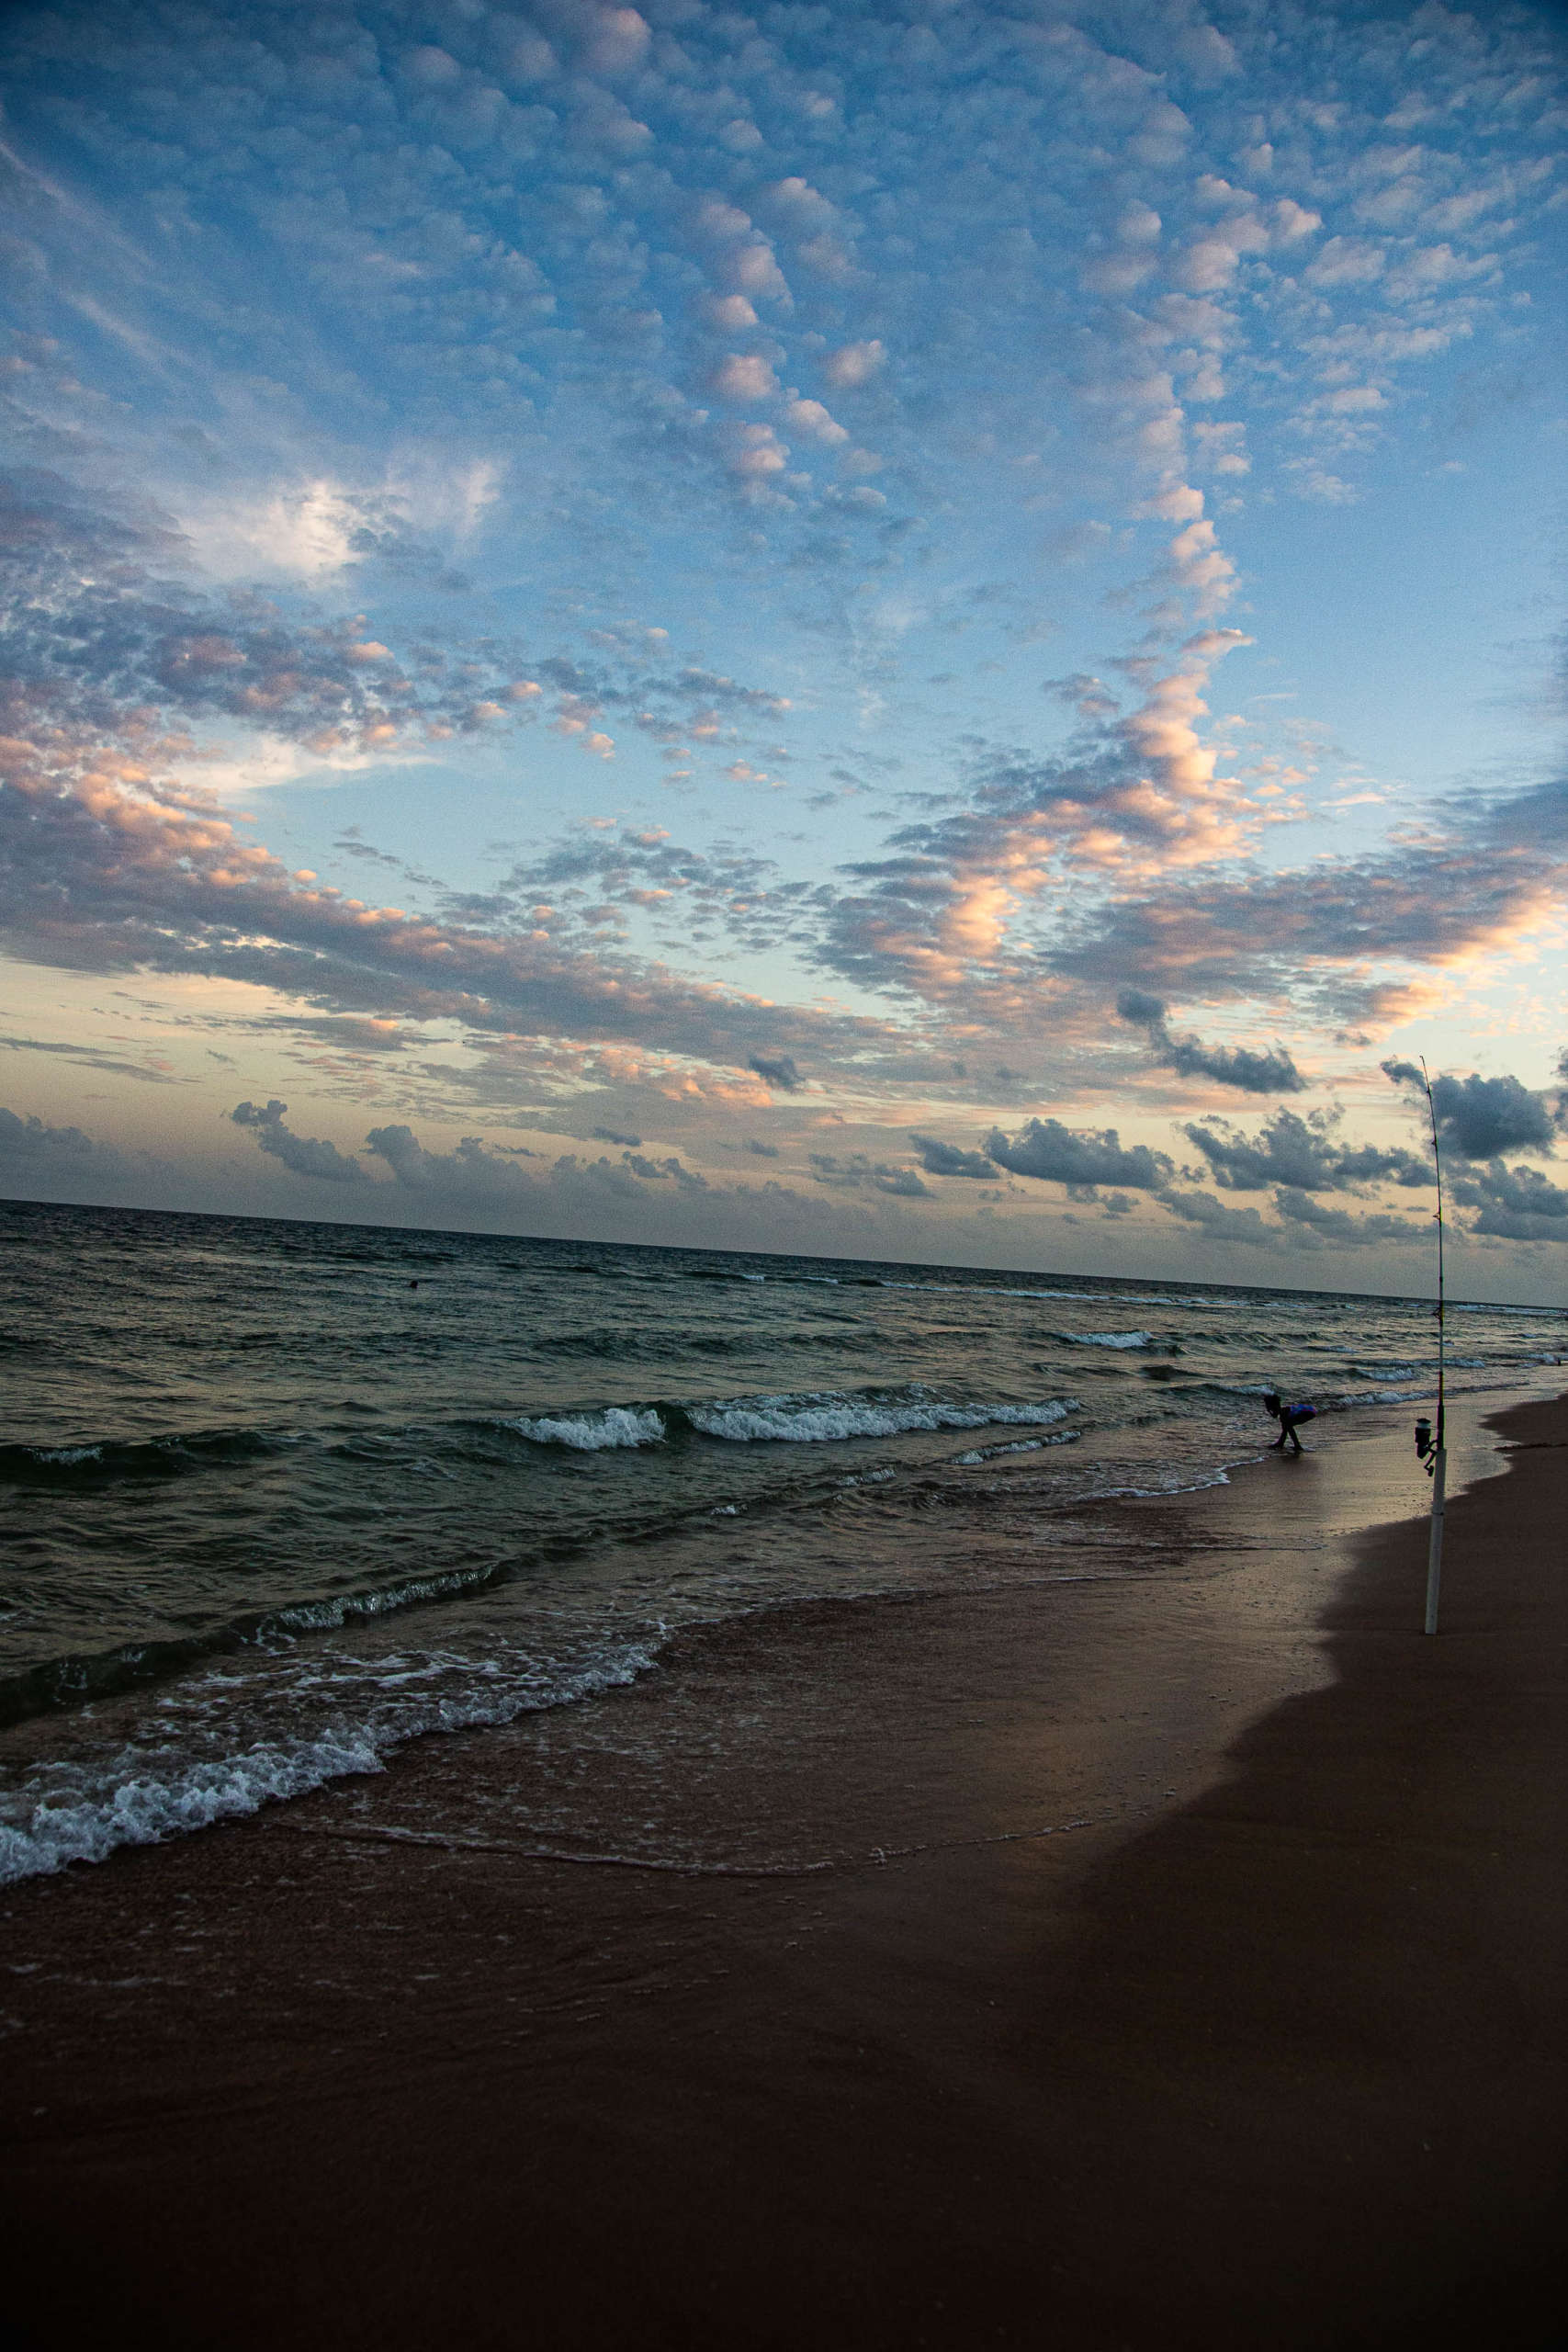 A beach just after sunset. Waves are crashing on the smooth shining sand, and a single person can be seen in the distance. Above the water are dozens of tiny scattered clouds, forming streaks and billows over the yellow-to-blue gradient of the sky.